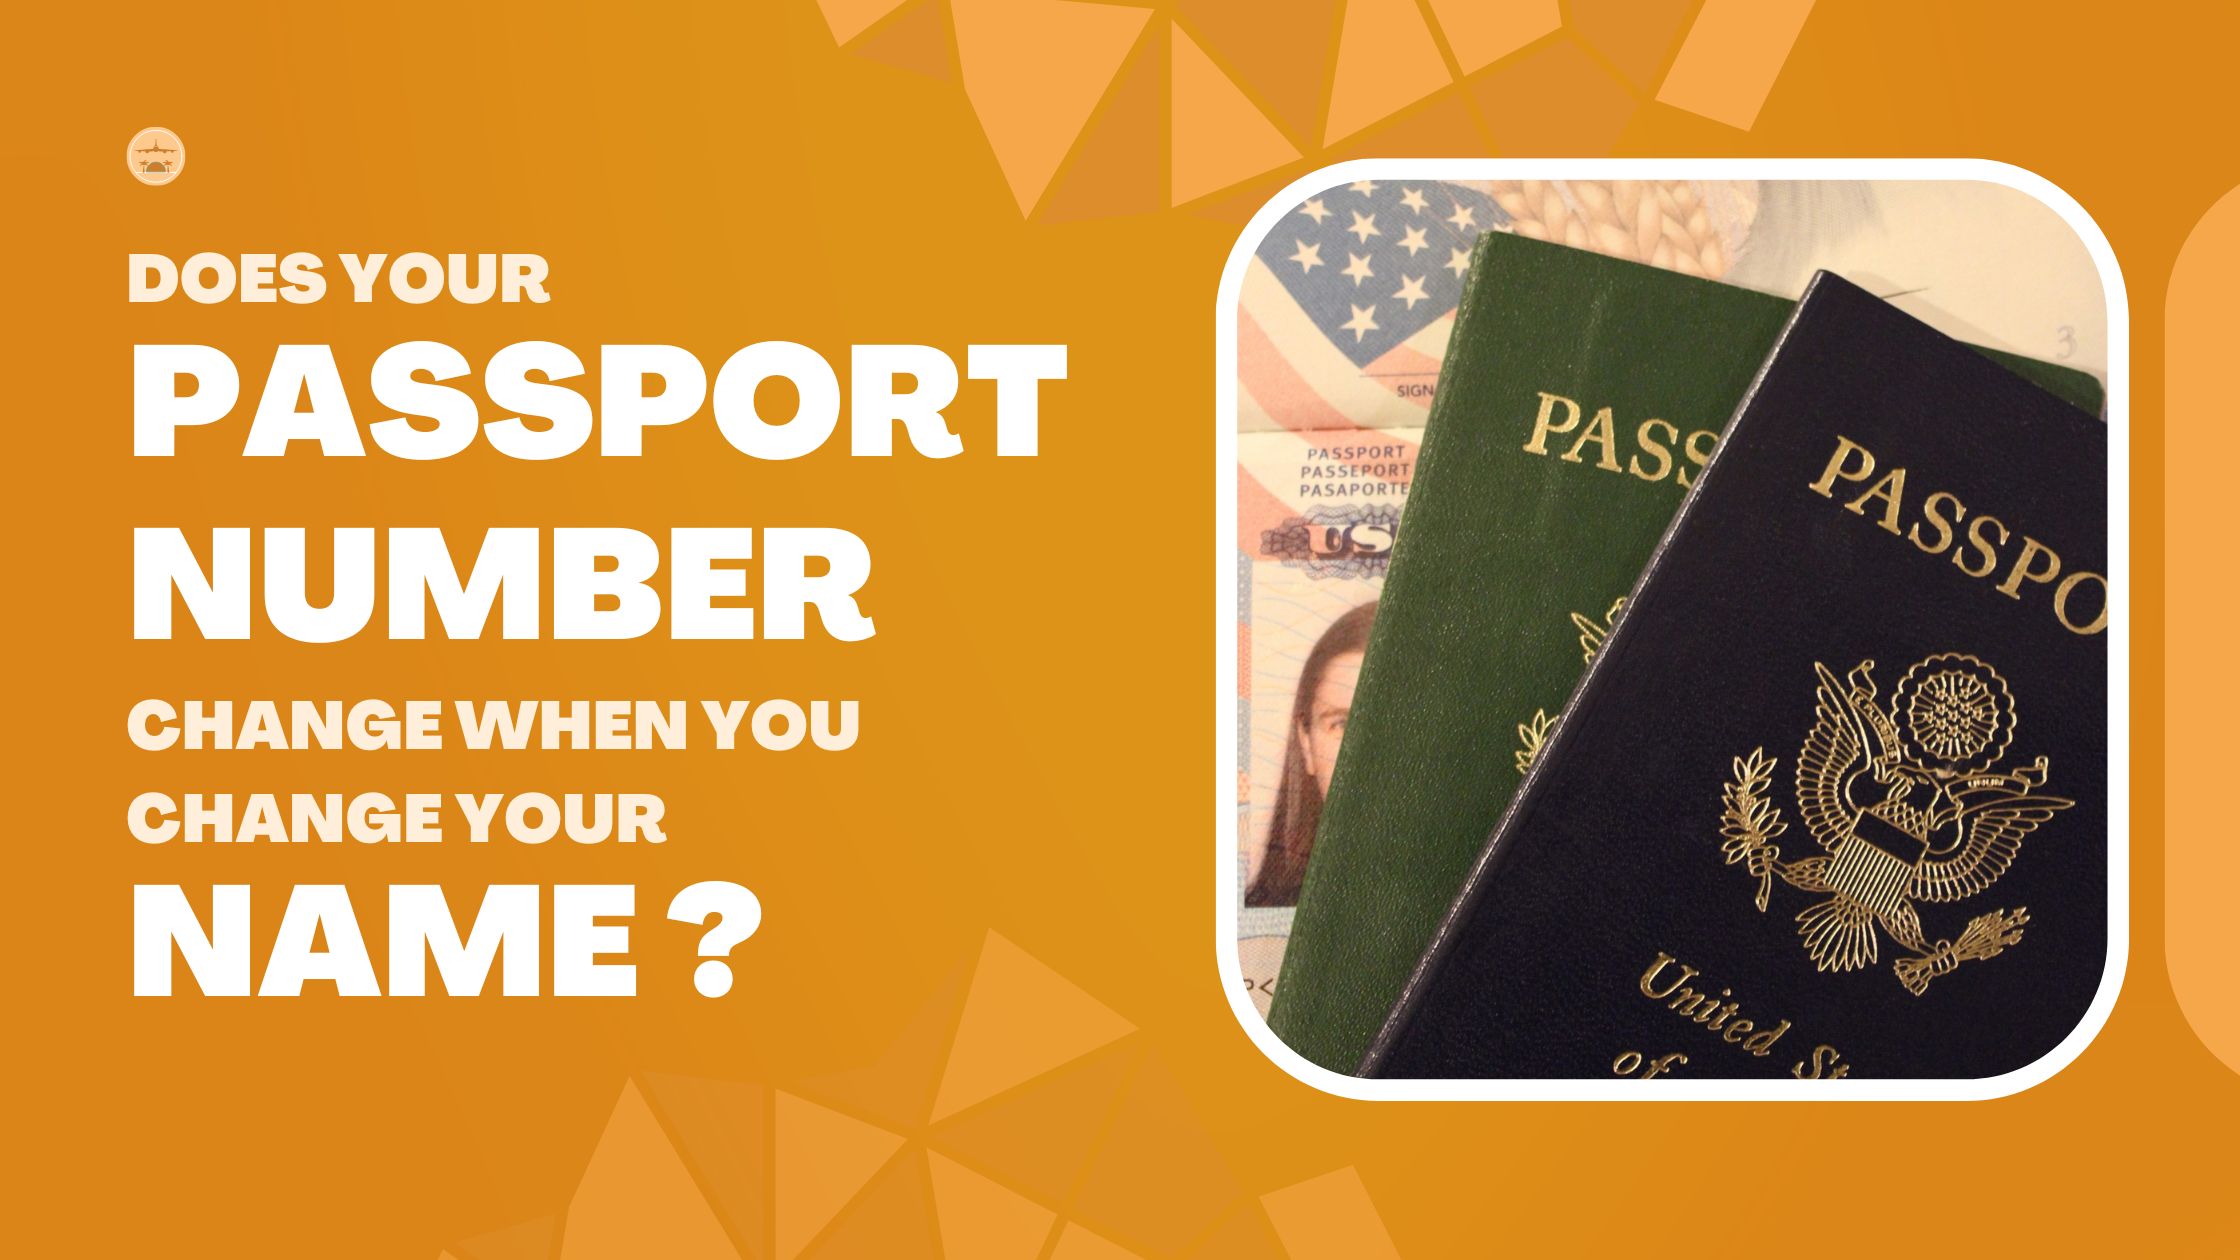 Does Your Passport Number Change When You Change Your Name?